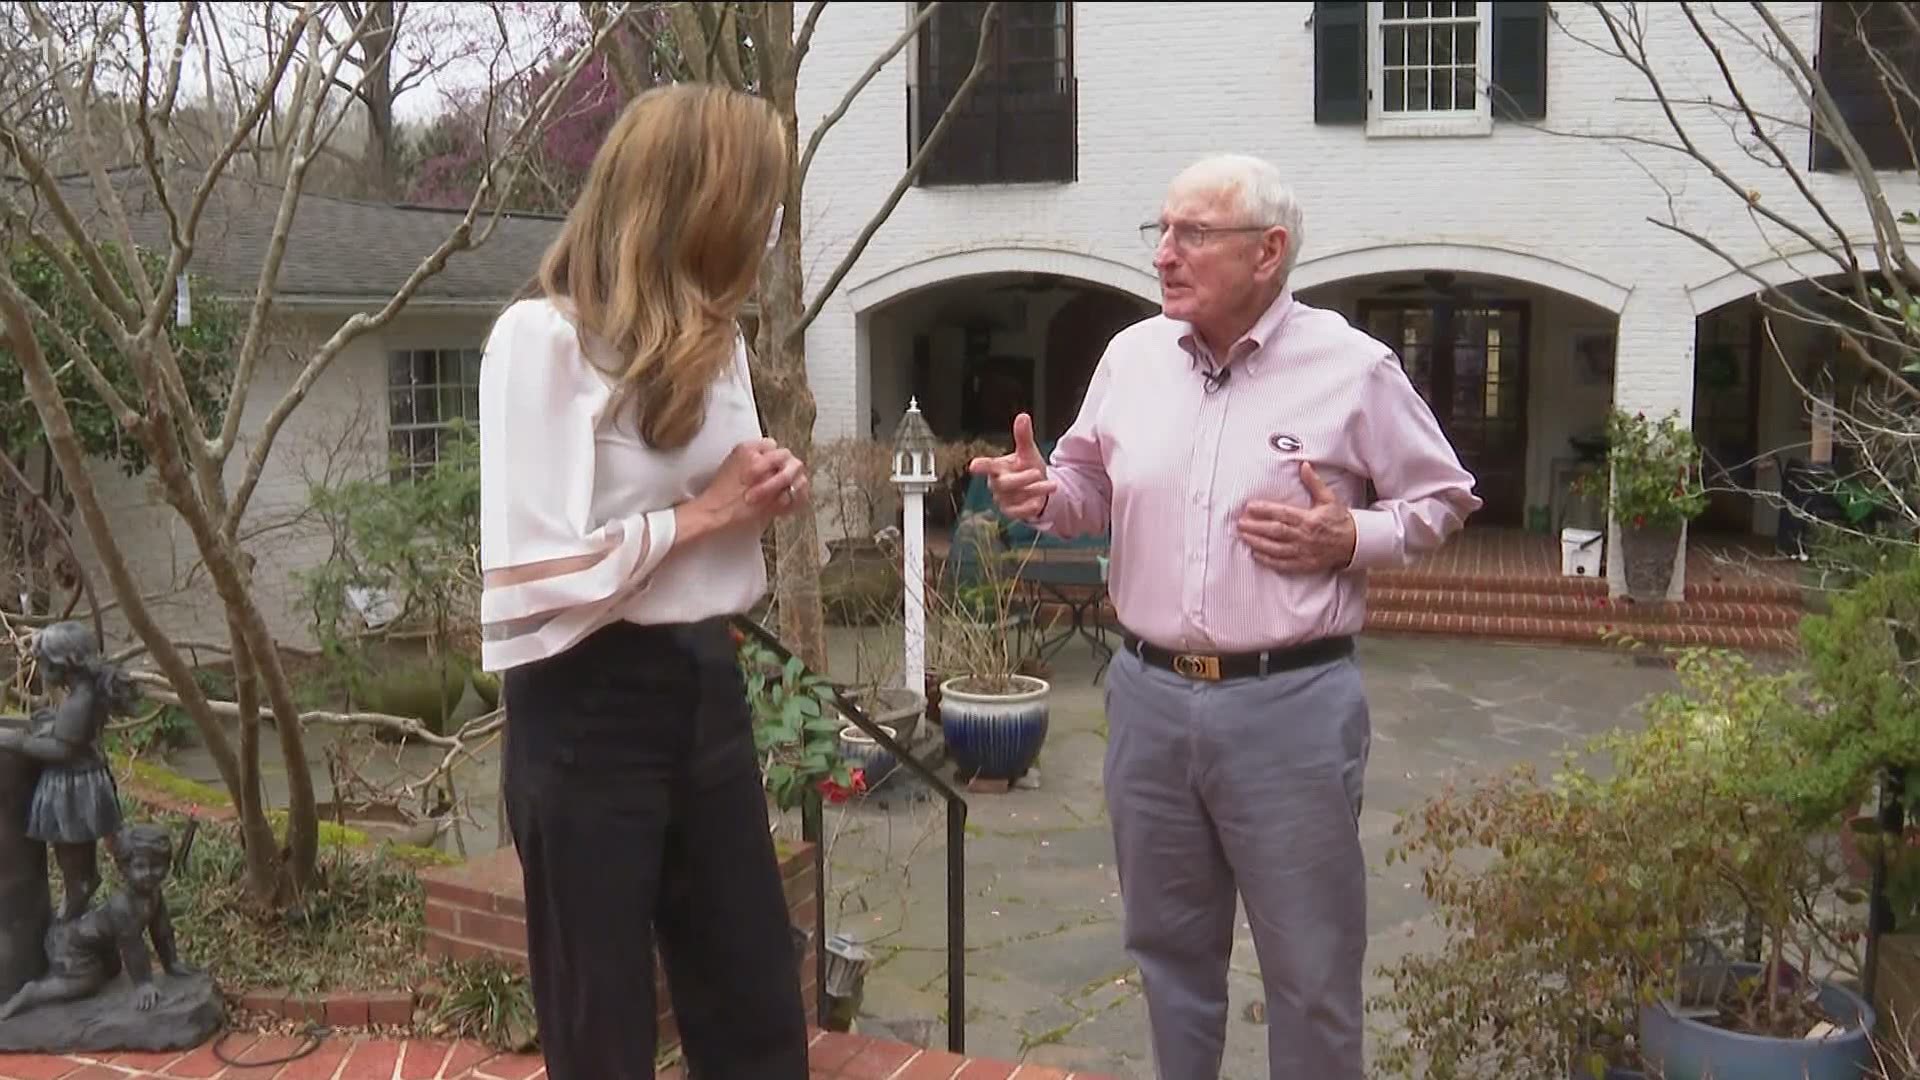 The legendary coach spoke with 11Alive's Cheryl Preheim about his time at UGA and his most cherished title: grandad.